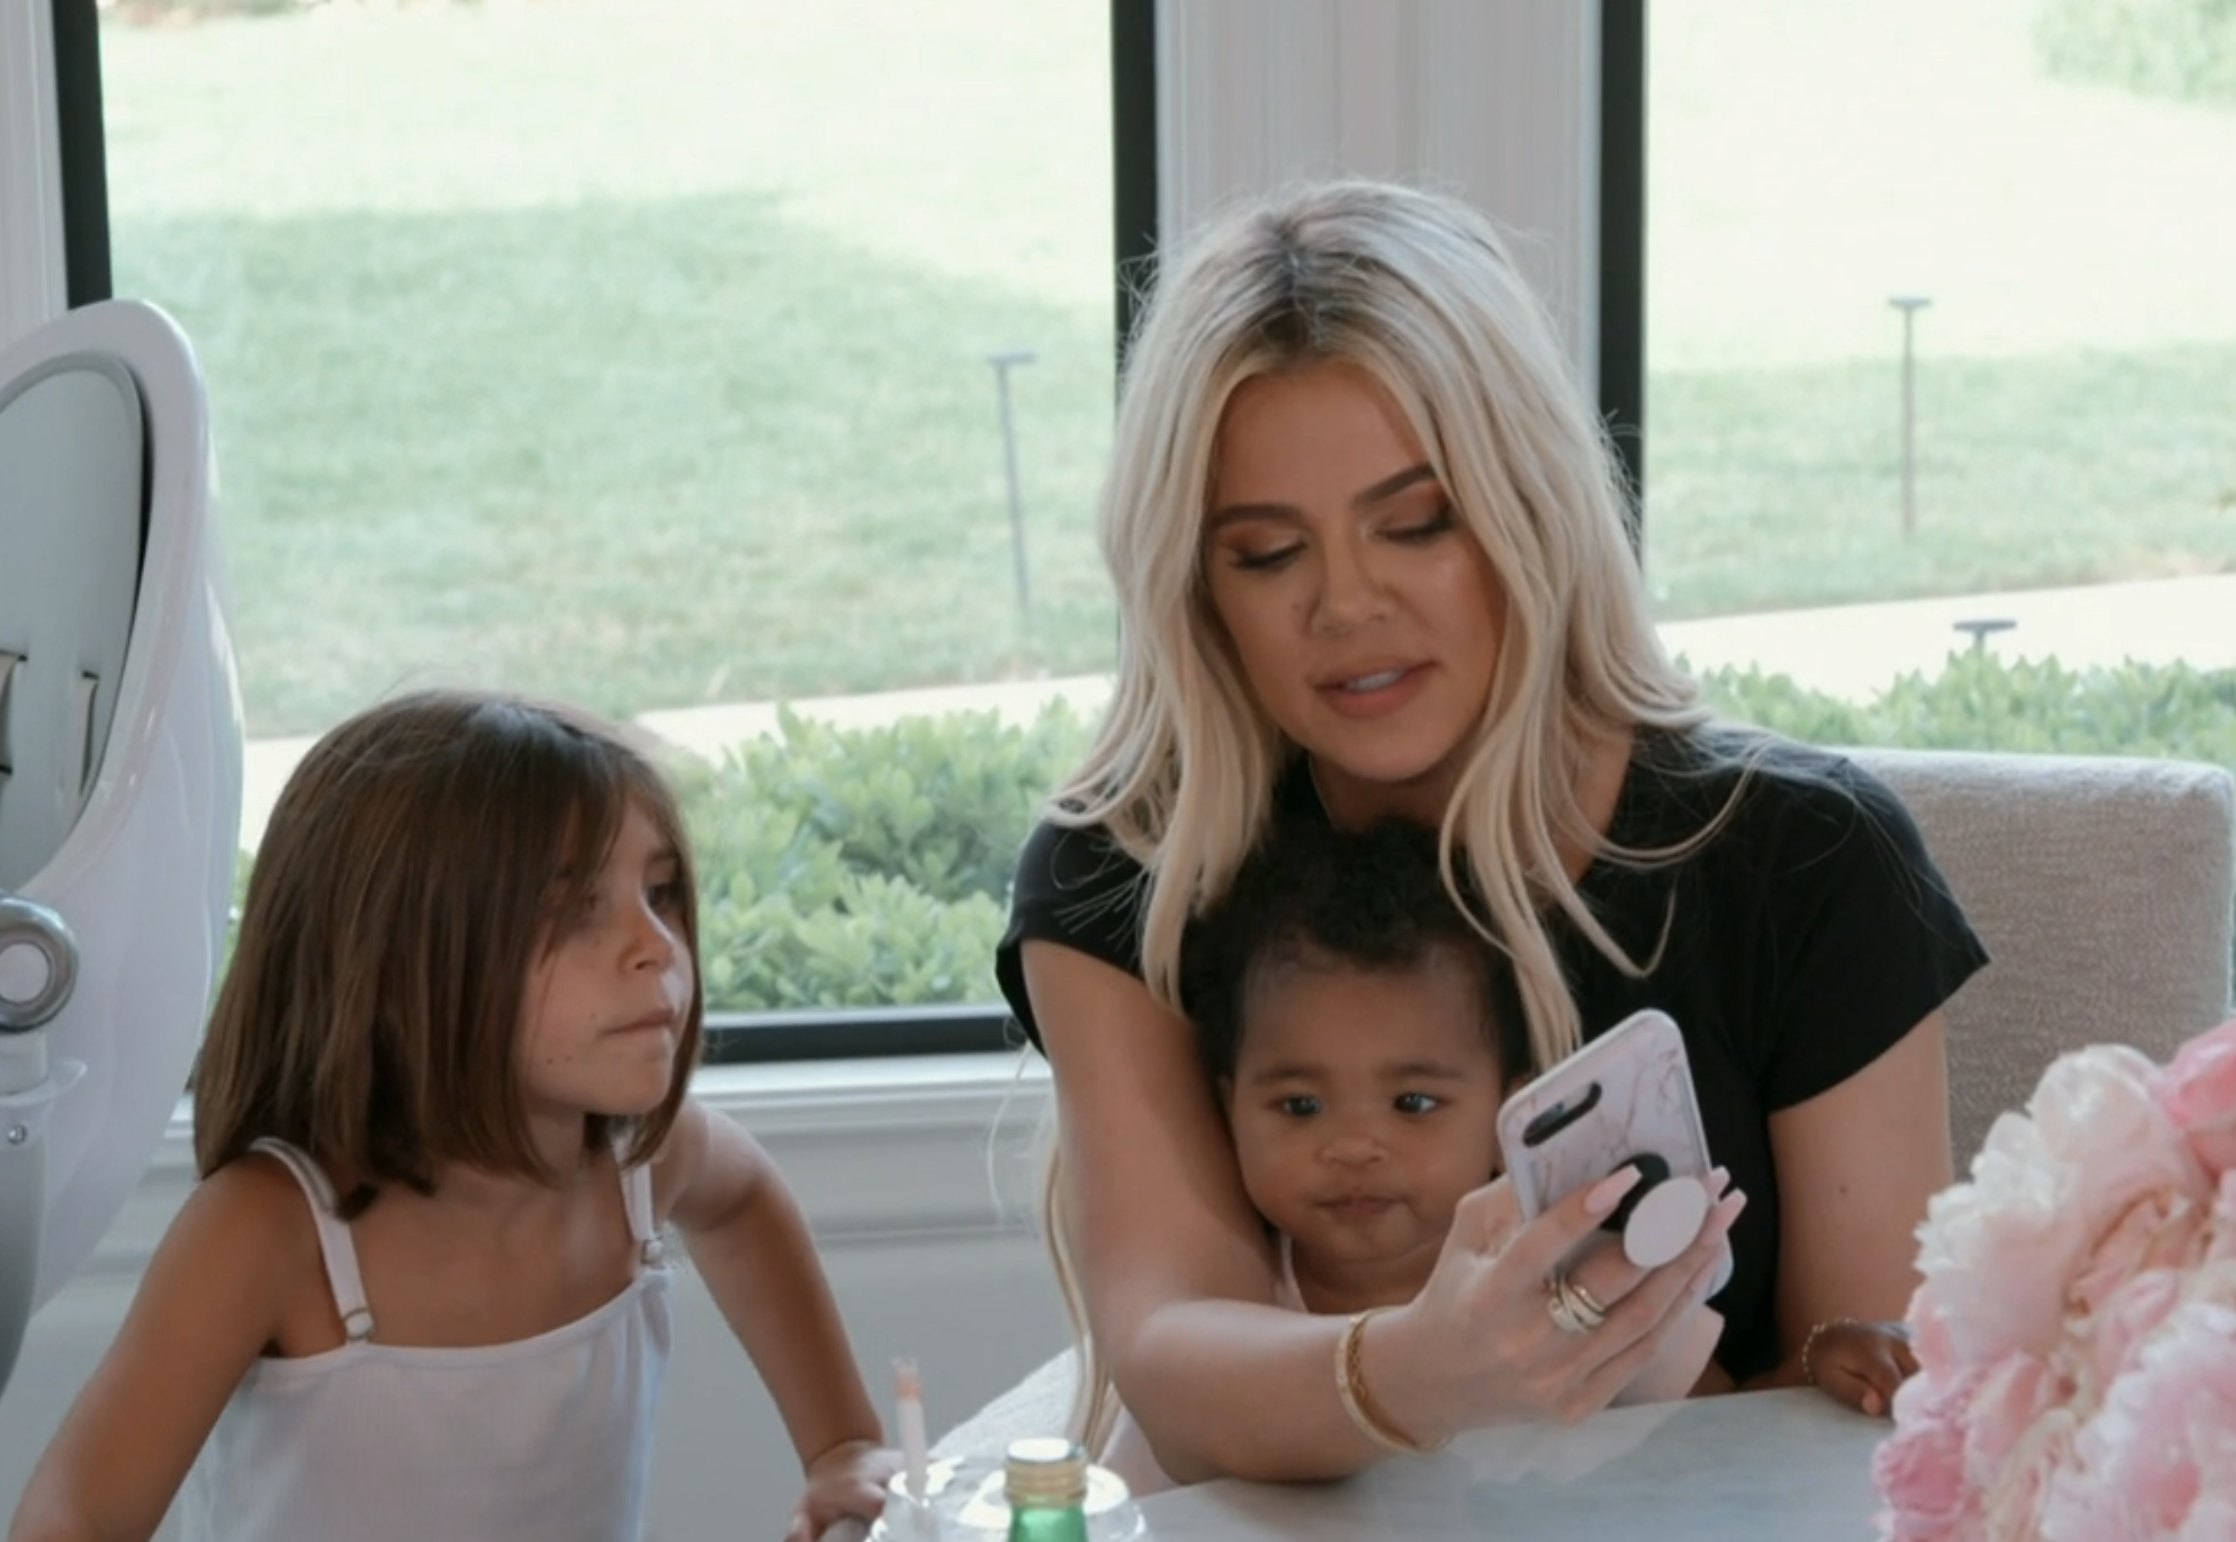 Khloé on the phone and sitting with children